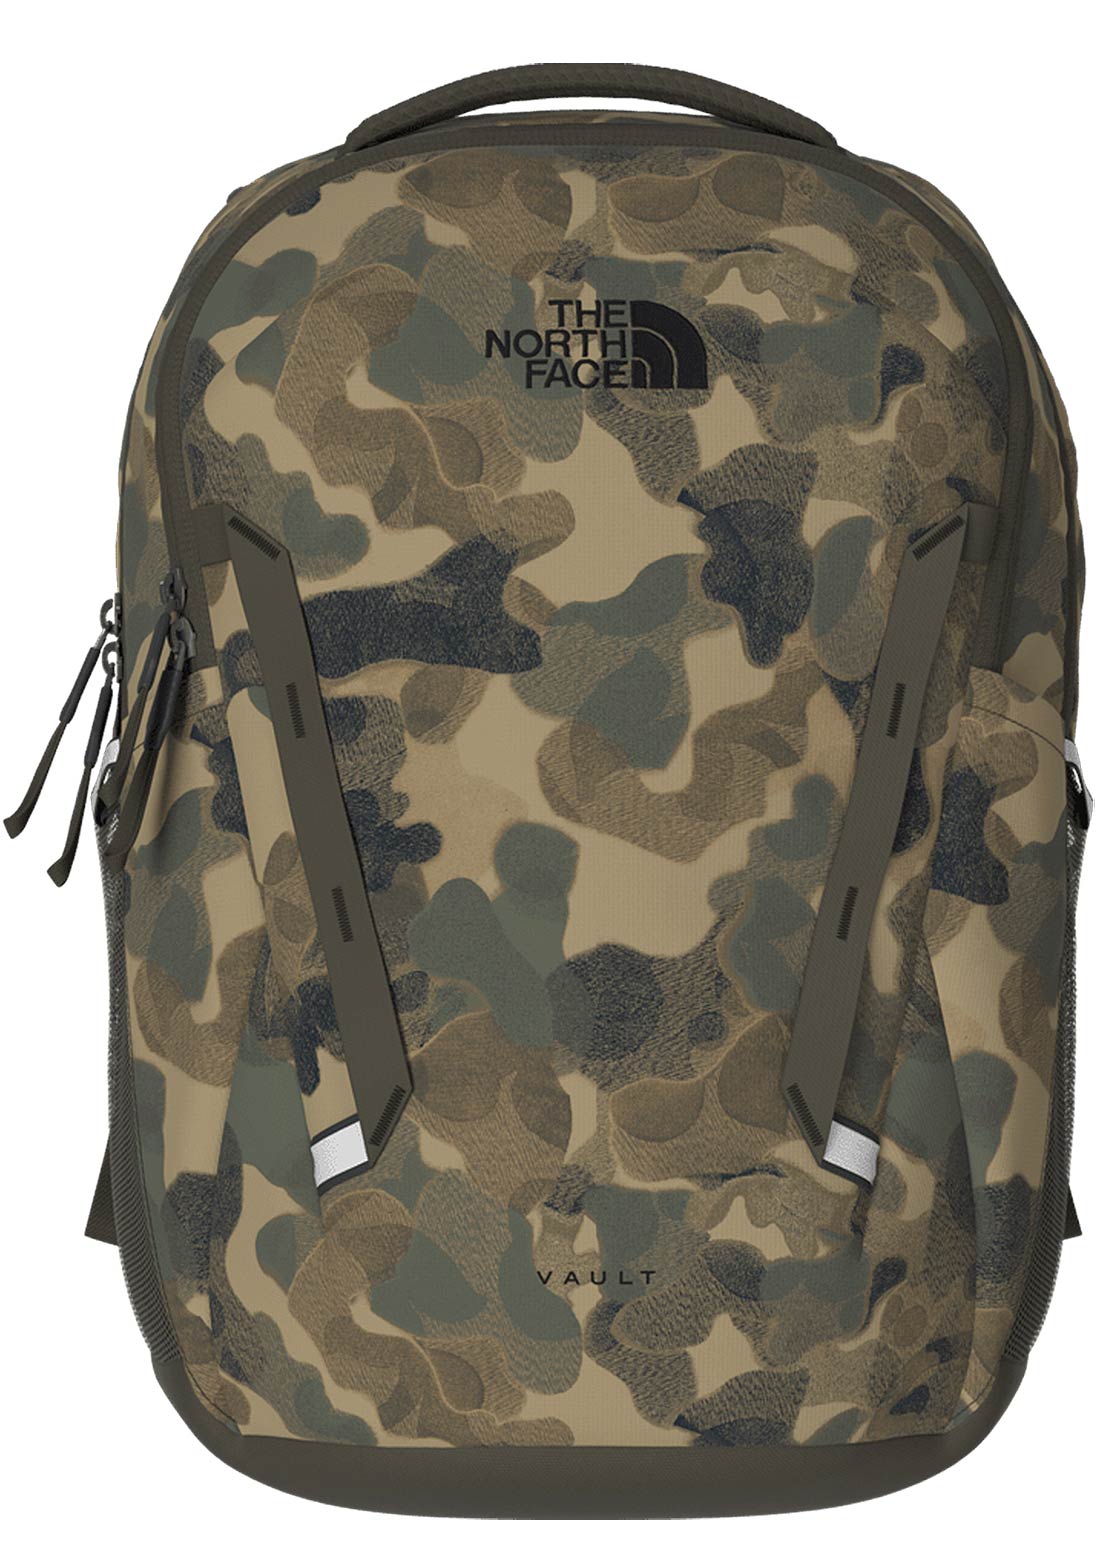 The North Face Vault Backpack Utility Brown Camo Texture Print/New Taupe Green